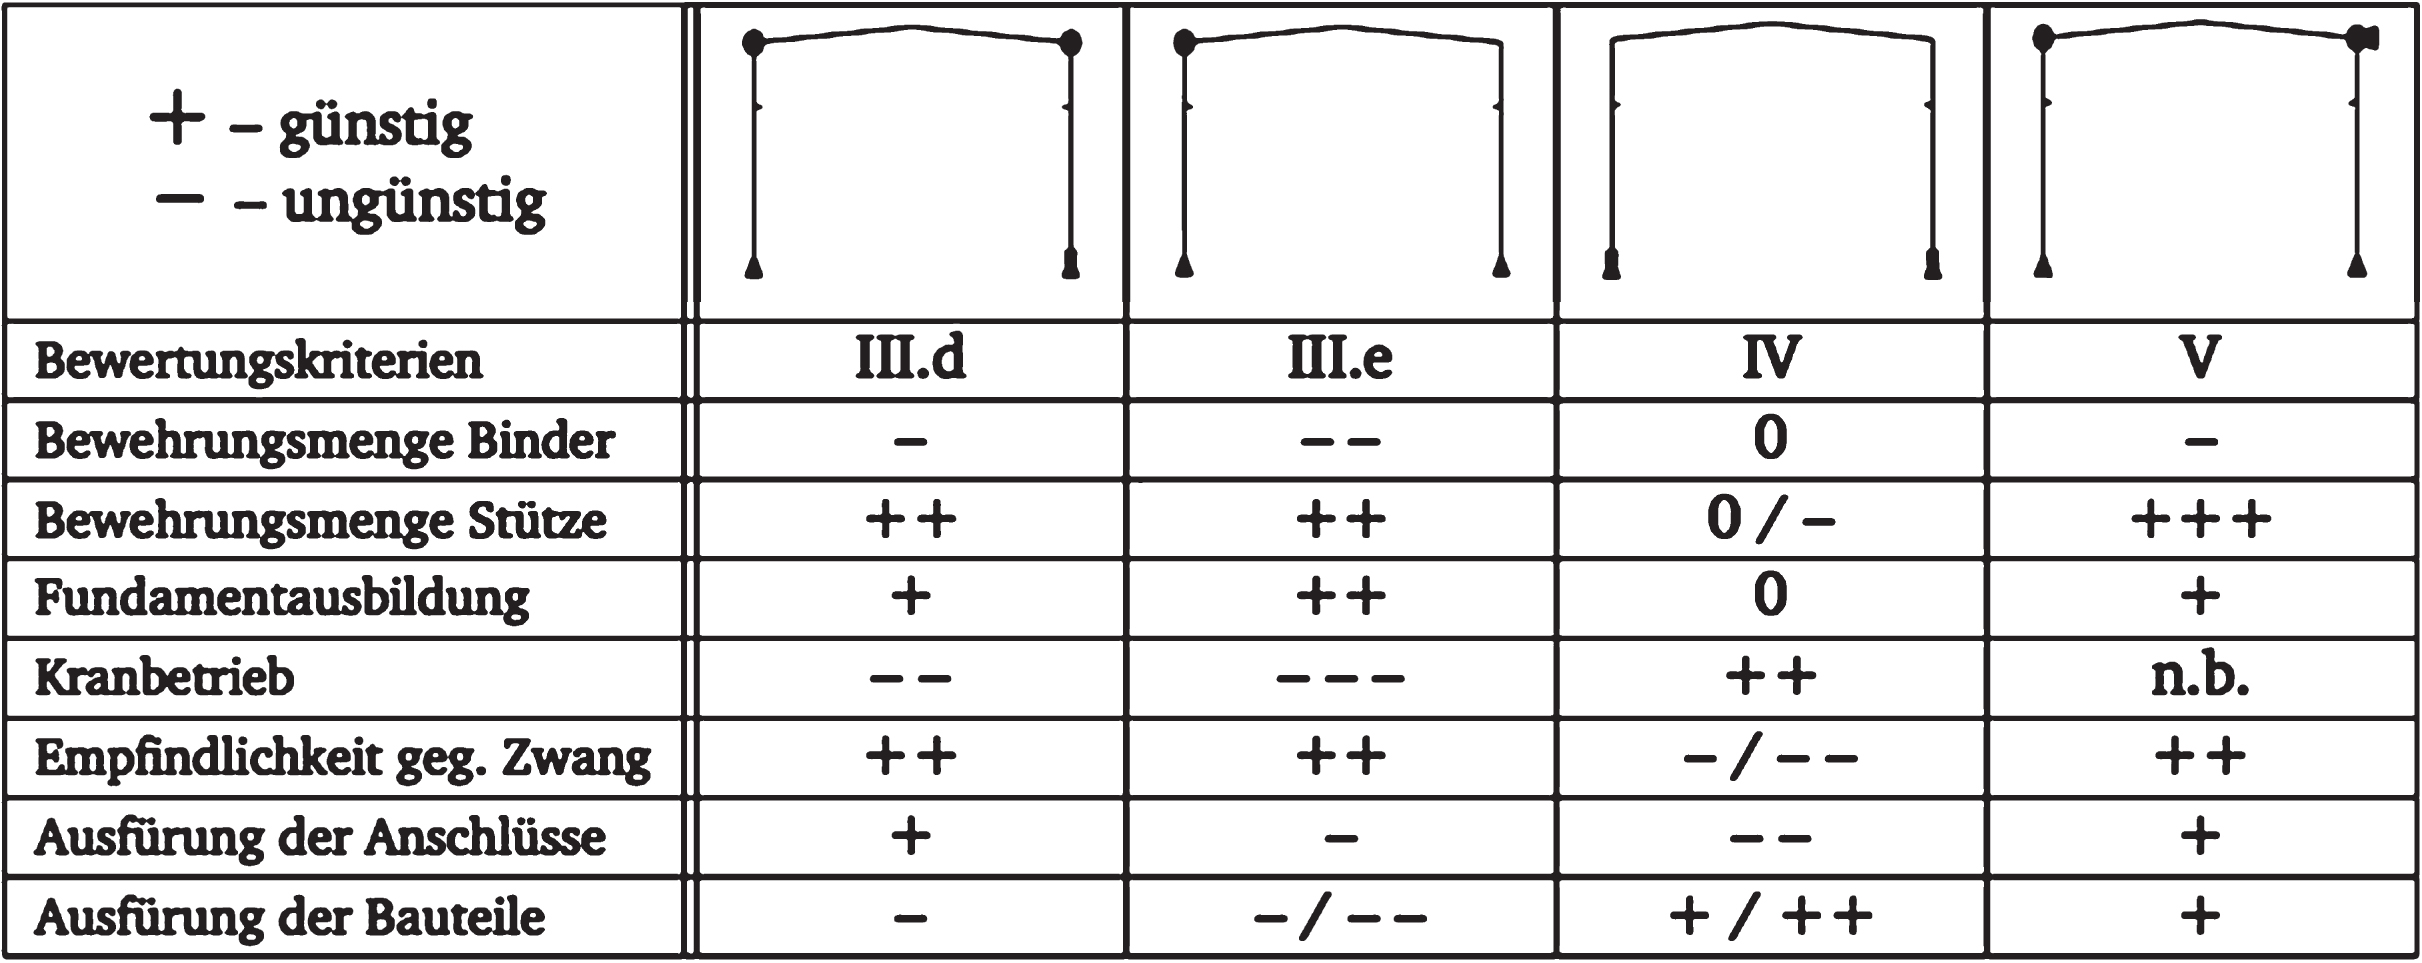 Evaluation of different structural systems (extract).